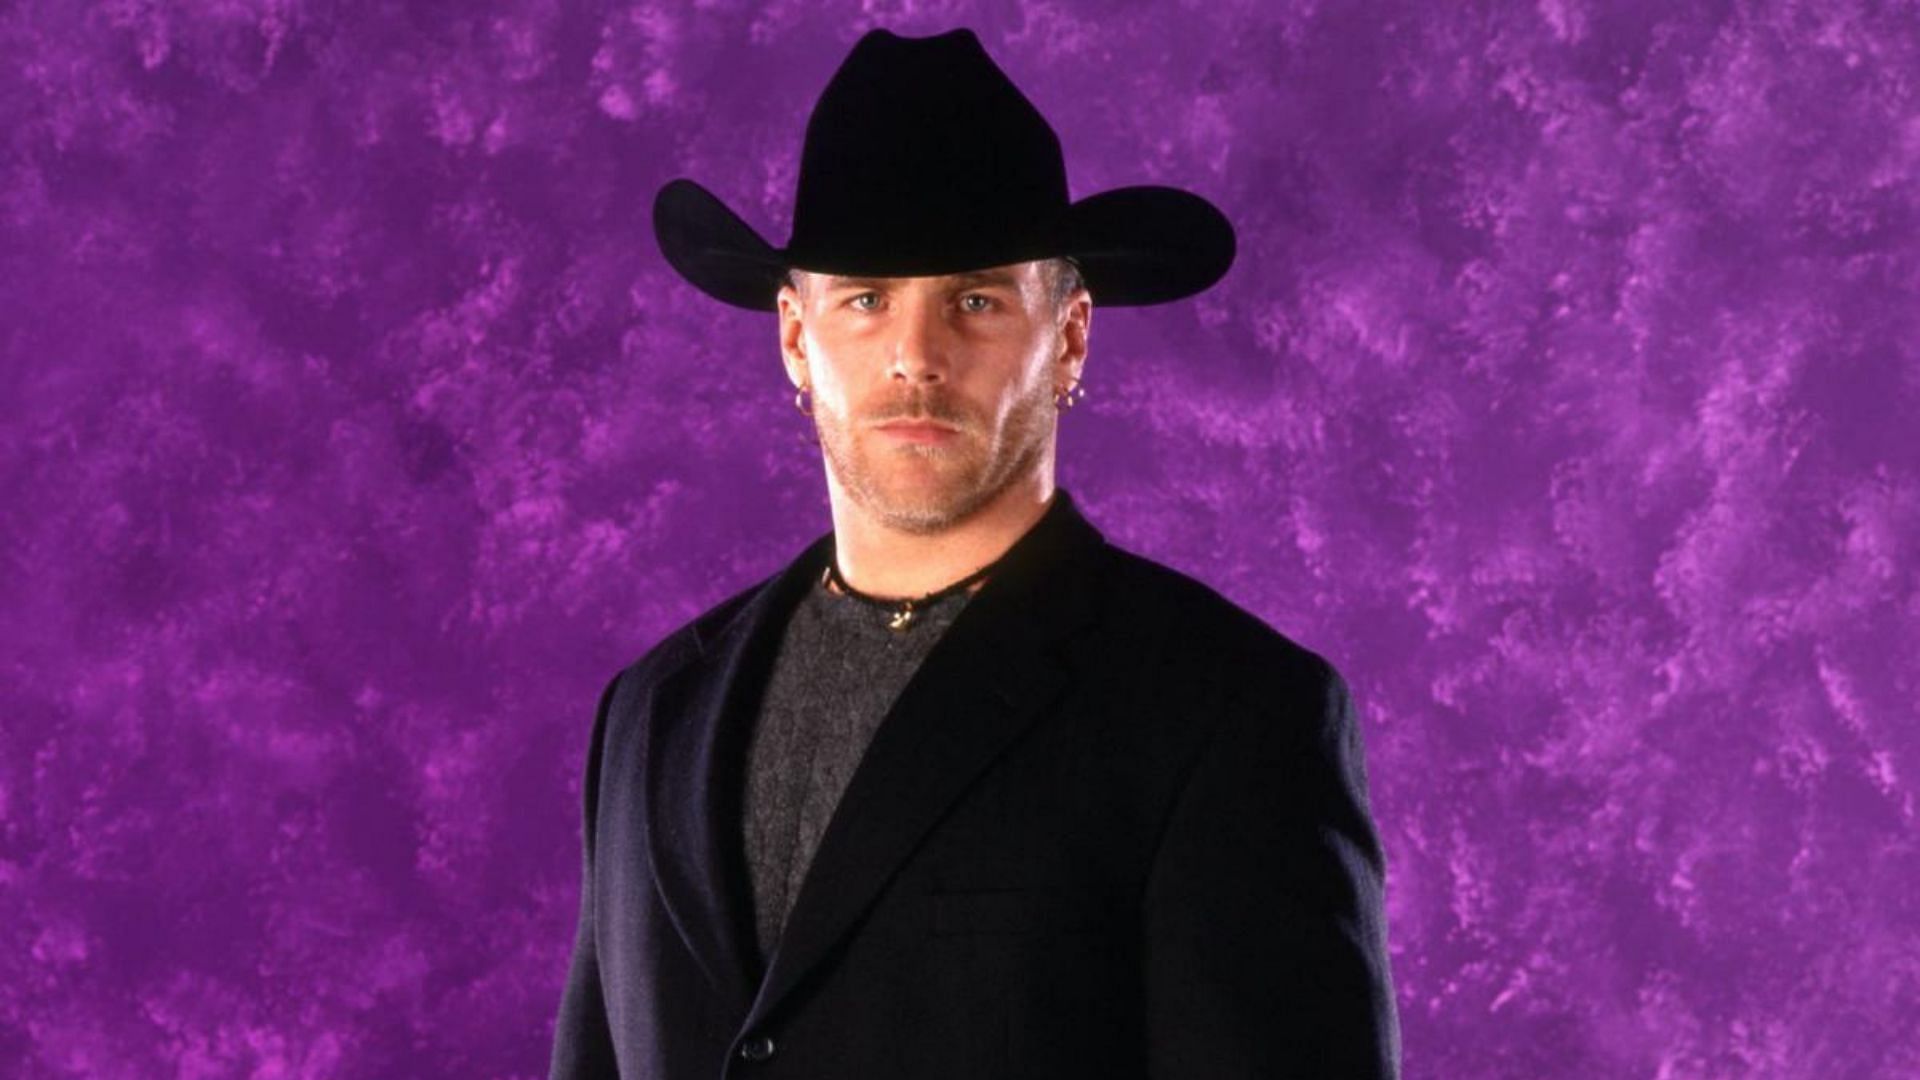 Shawn Michaels now works as an NXT coach.